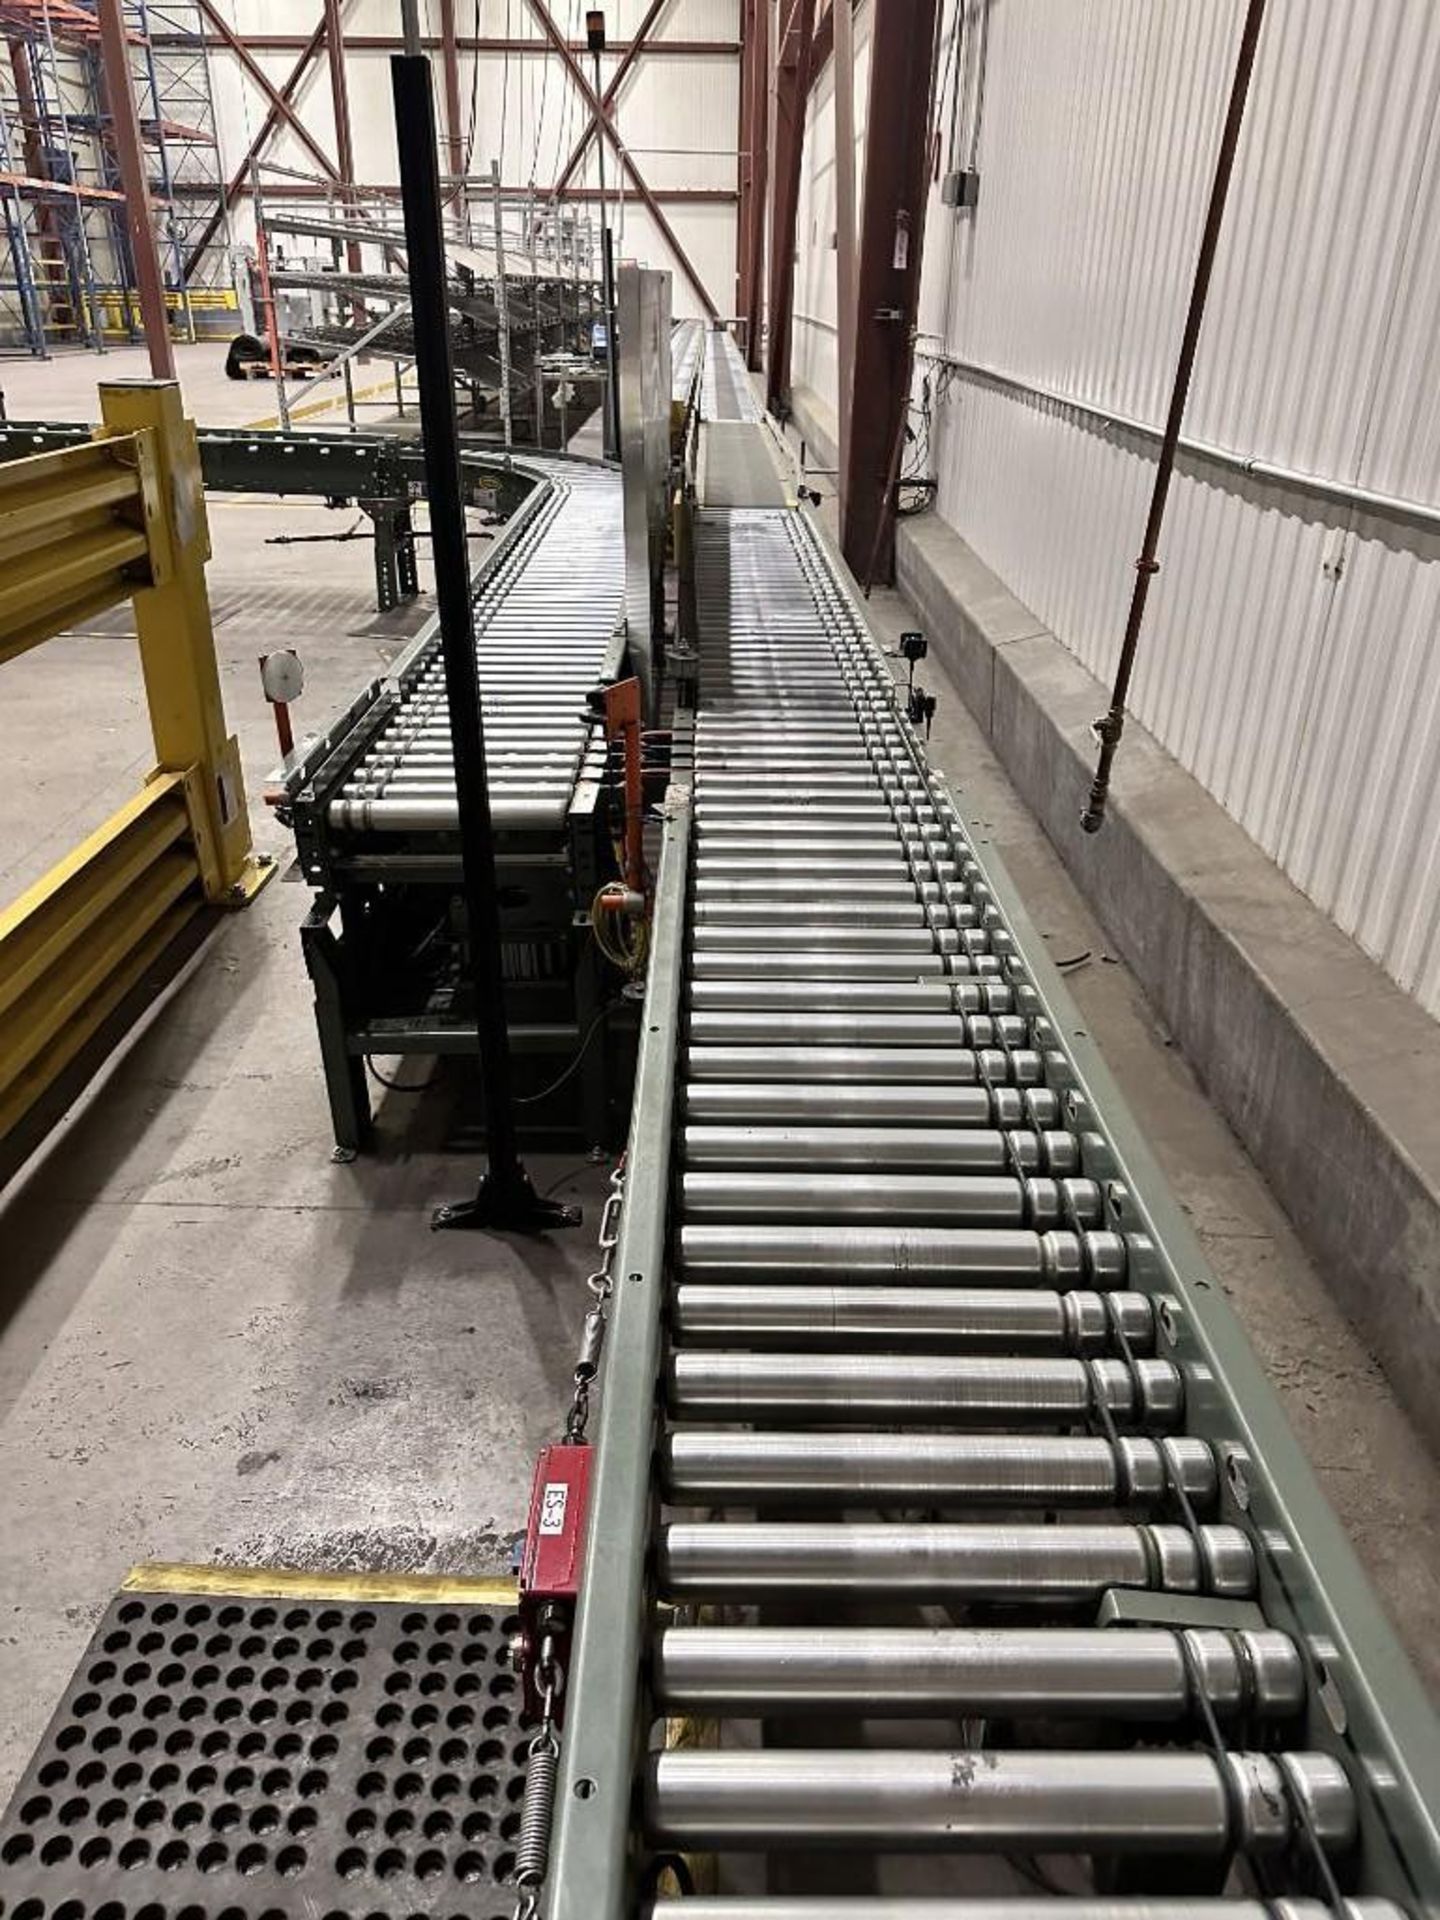 HYTROL POWER CONVEYOR SYSTEM 57 FOOT LONG DRIVEN. WITH BOX SHIFTER - Image 9 of 10